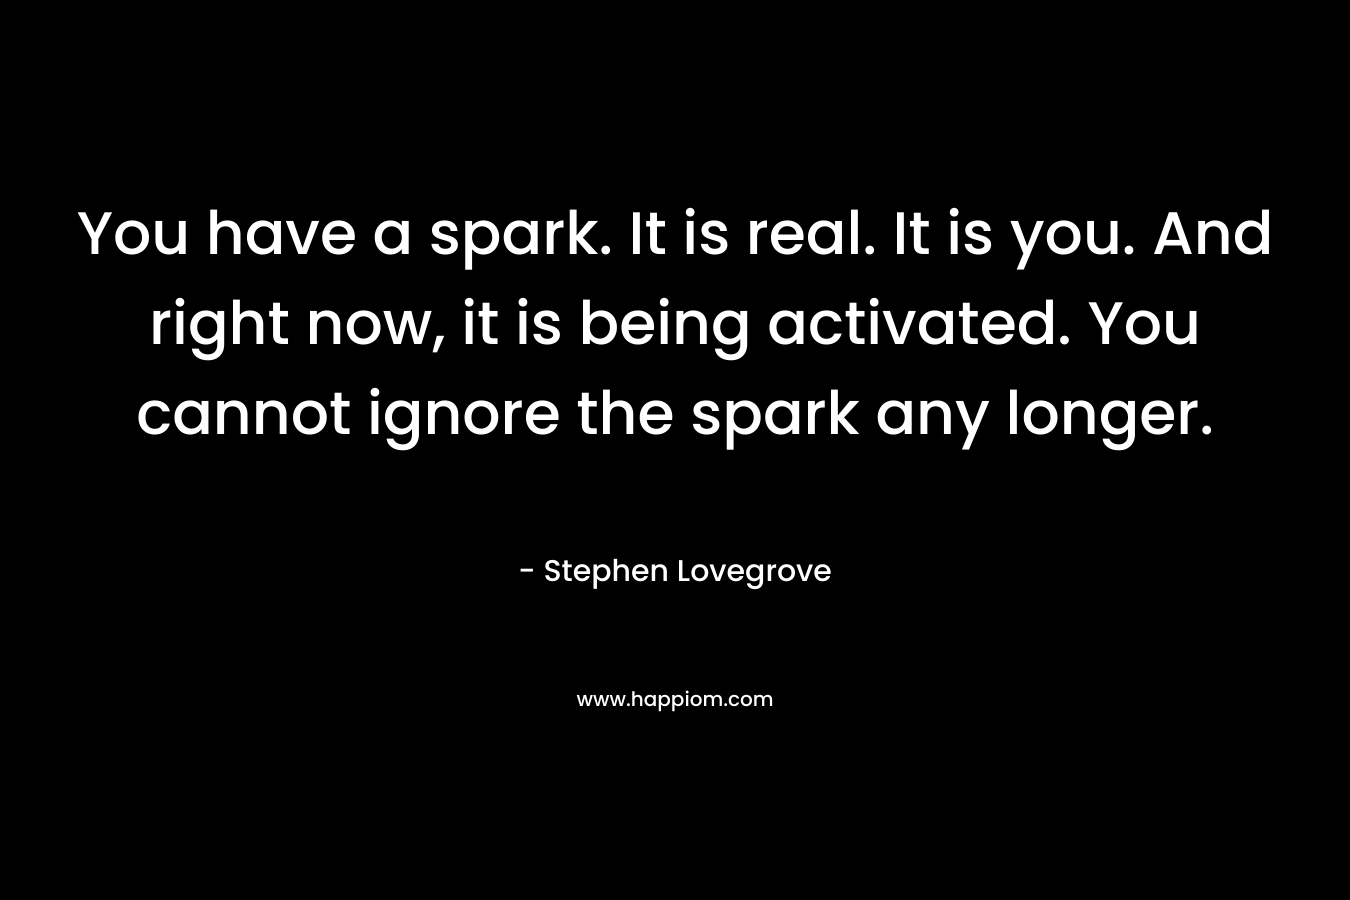 You have a spark. It is real. It is you. And right now, it is being activated. You cannot ignore the spark any longer.